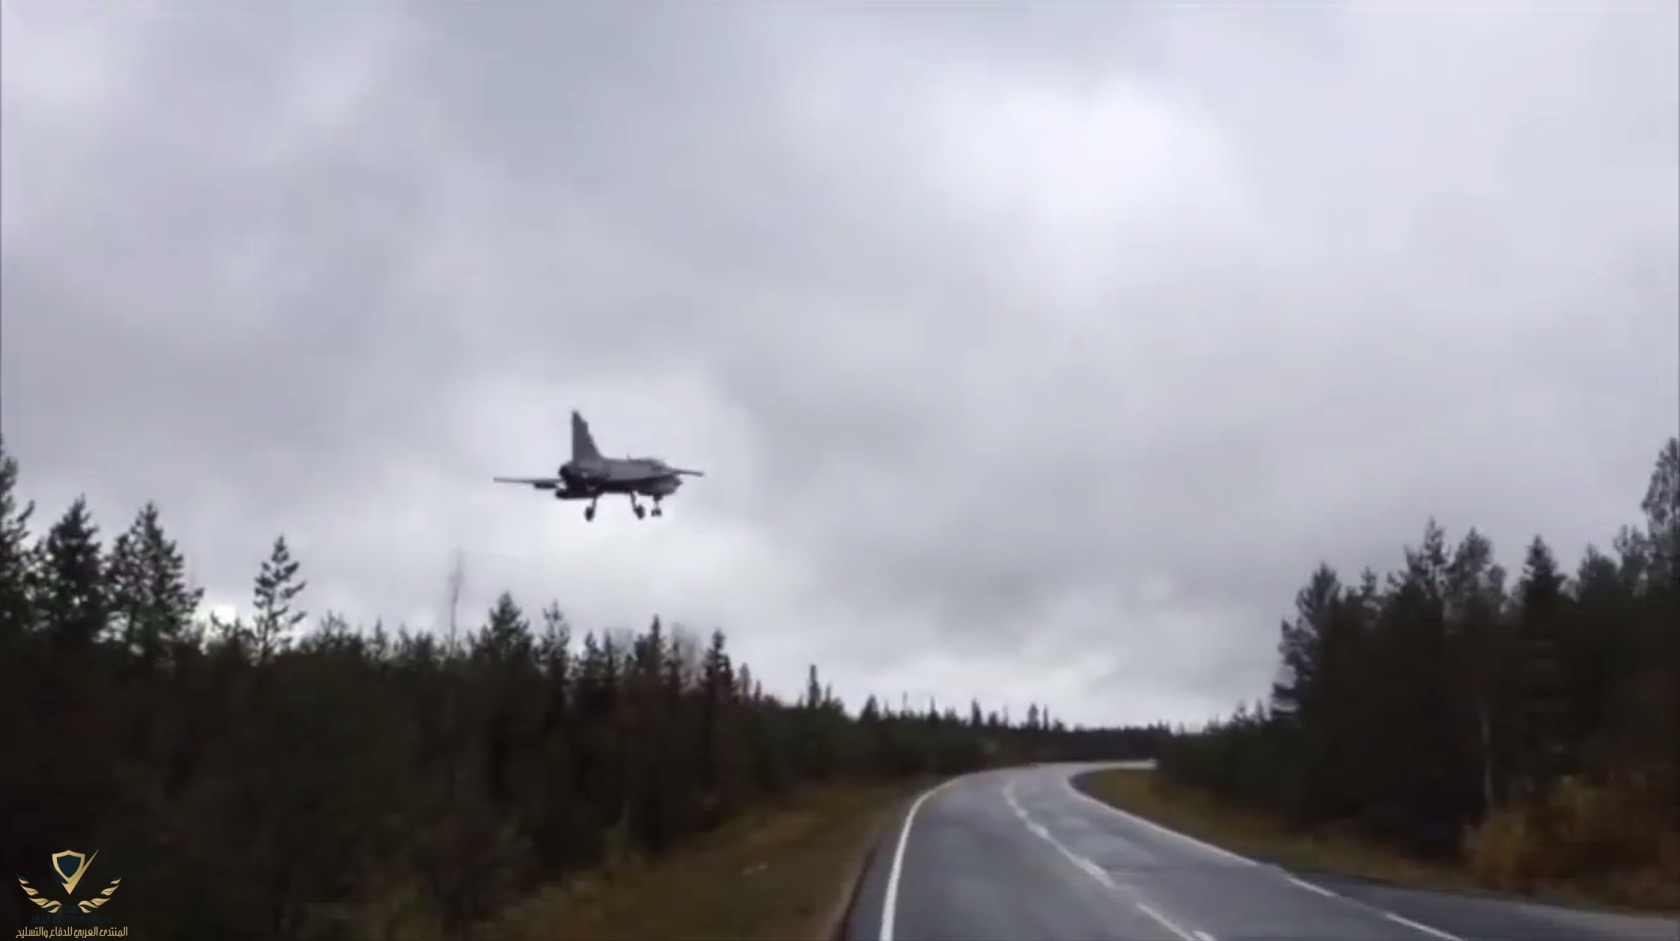 saab-jas-39-fighter-jet-sees-no-reason-not-to-land-on-a-two-lane-road-in-finland-video-100748_1.jpg